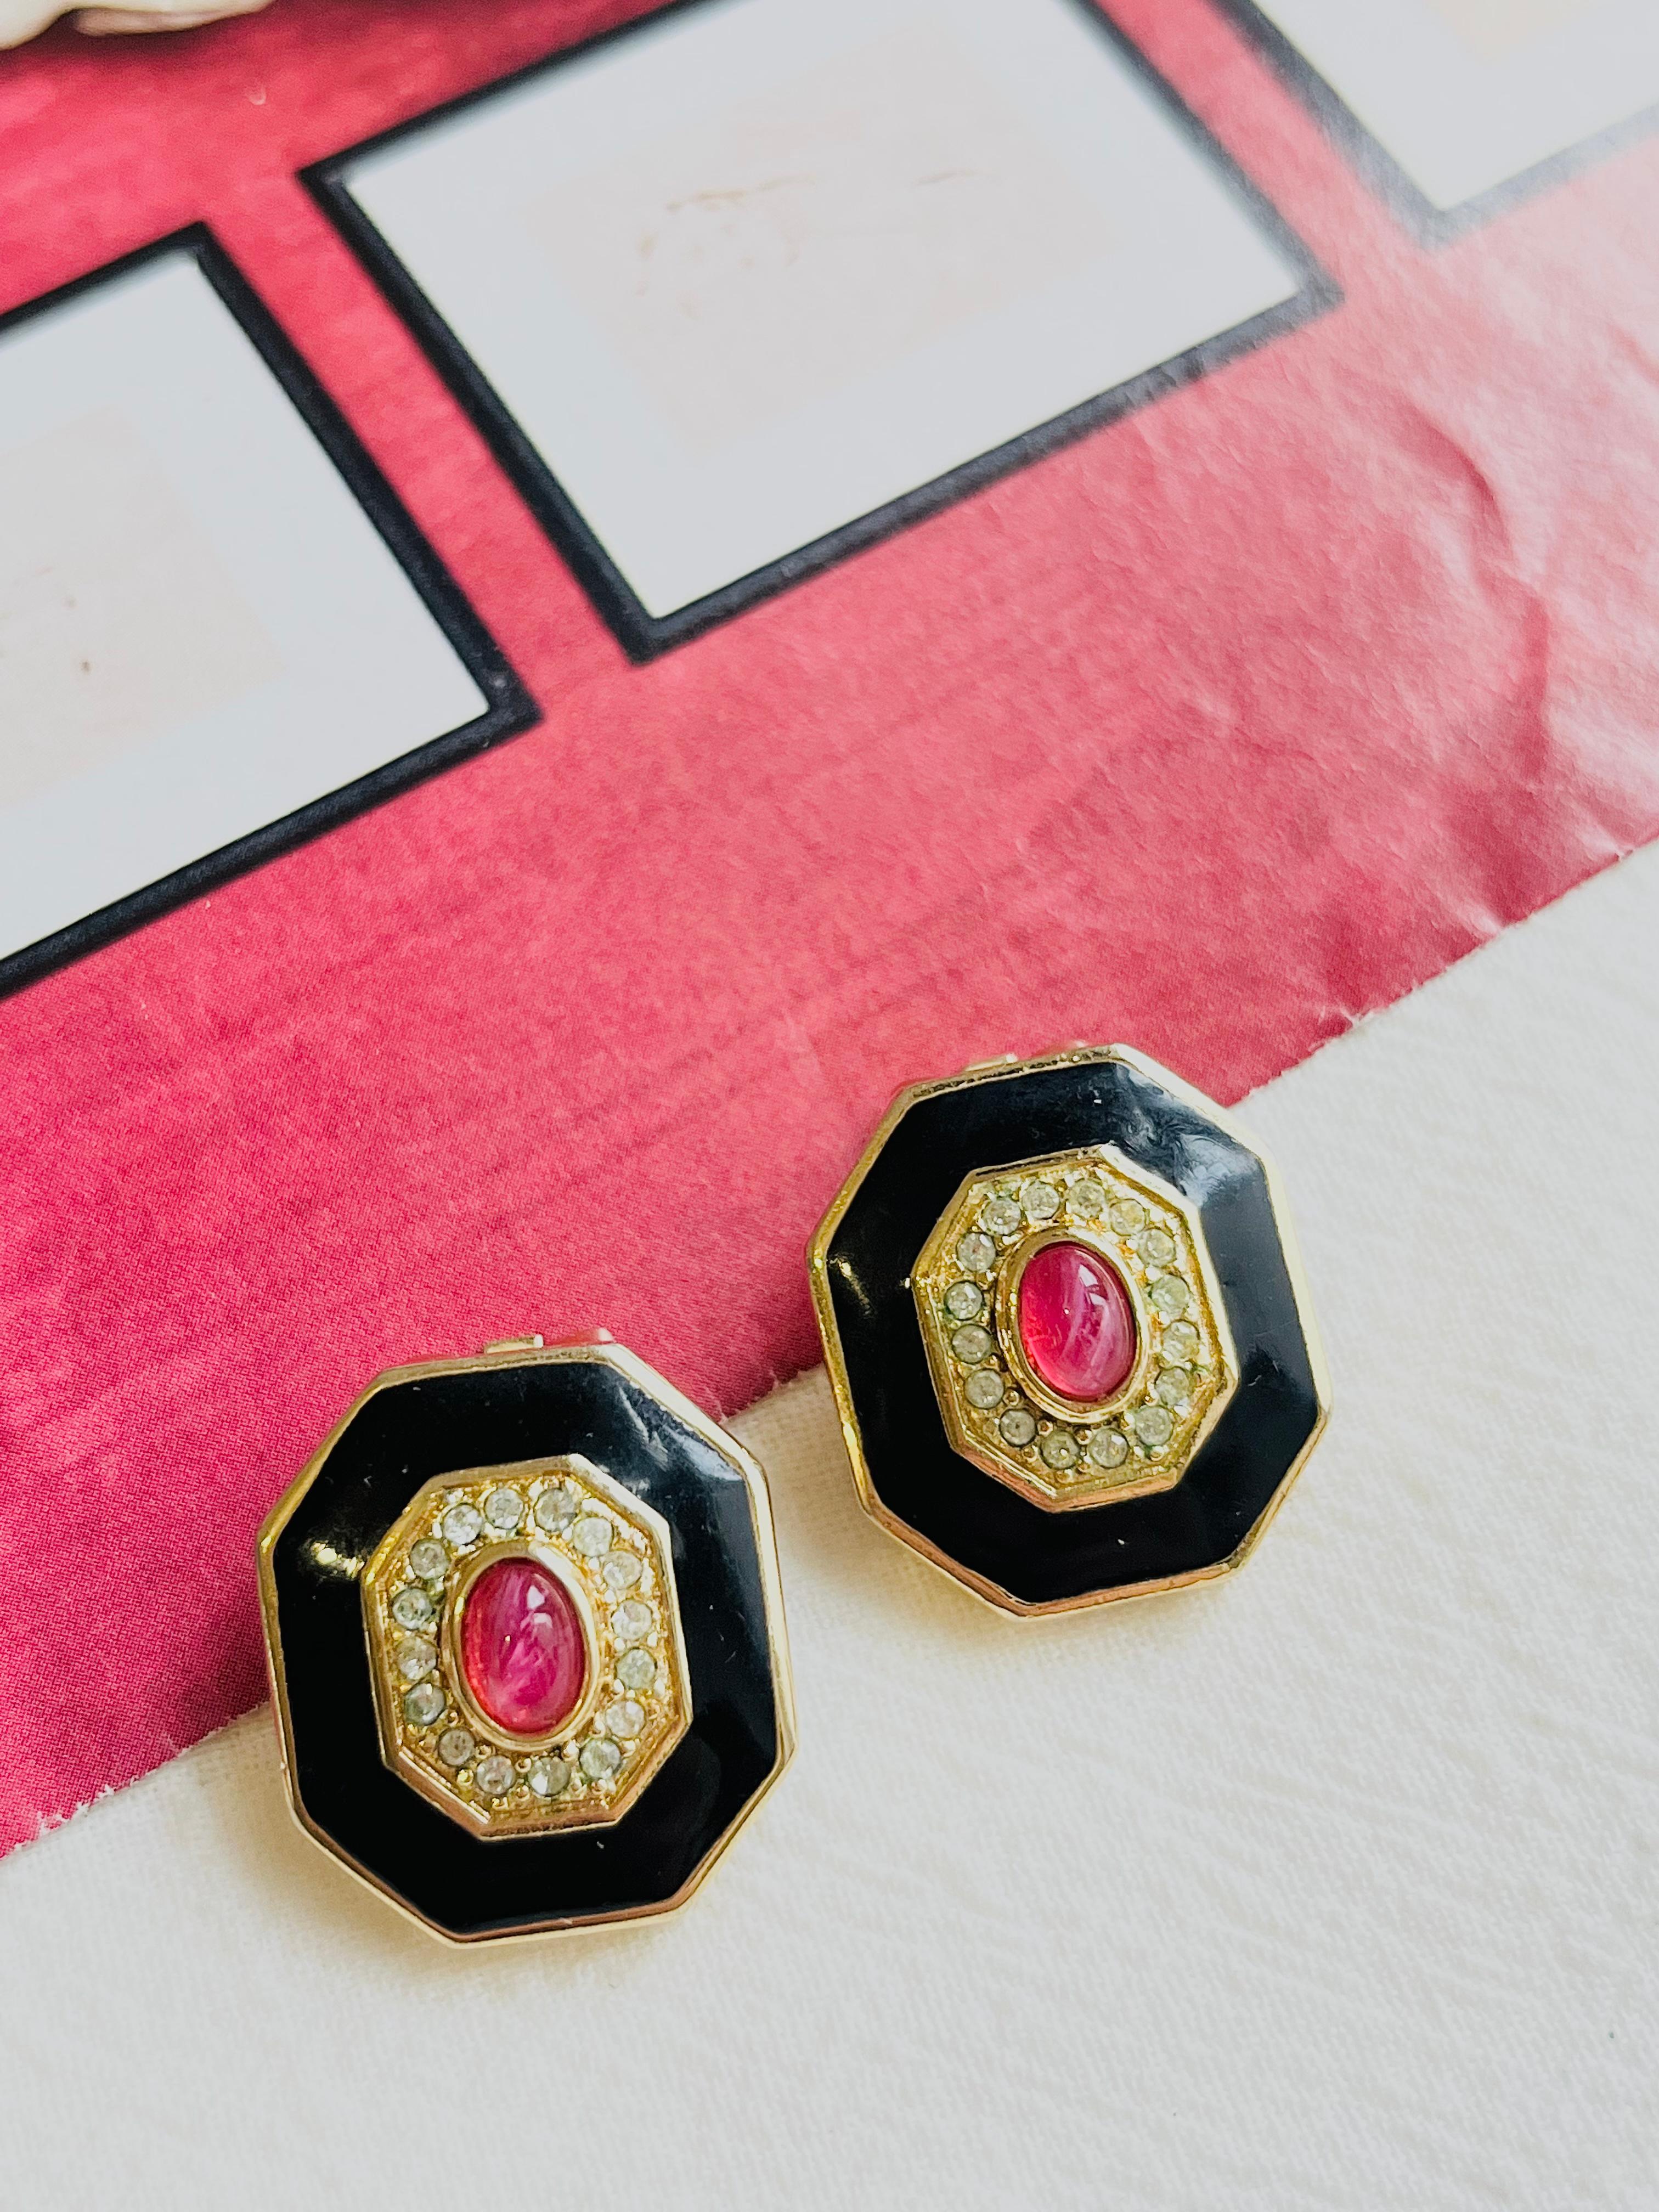 Christian Dior Vintage 1980s Ruby Red Gripoix Black Enamel Crystals Octagon Clip Earrings, Gold Tone

Very good condition. Very light scratches or colour loss. 100% genuine.

A very beautiful pair of clip on earrings by Chr. DIOR, signed at the